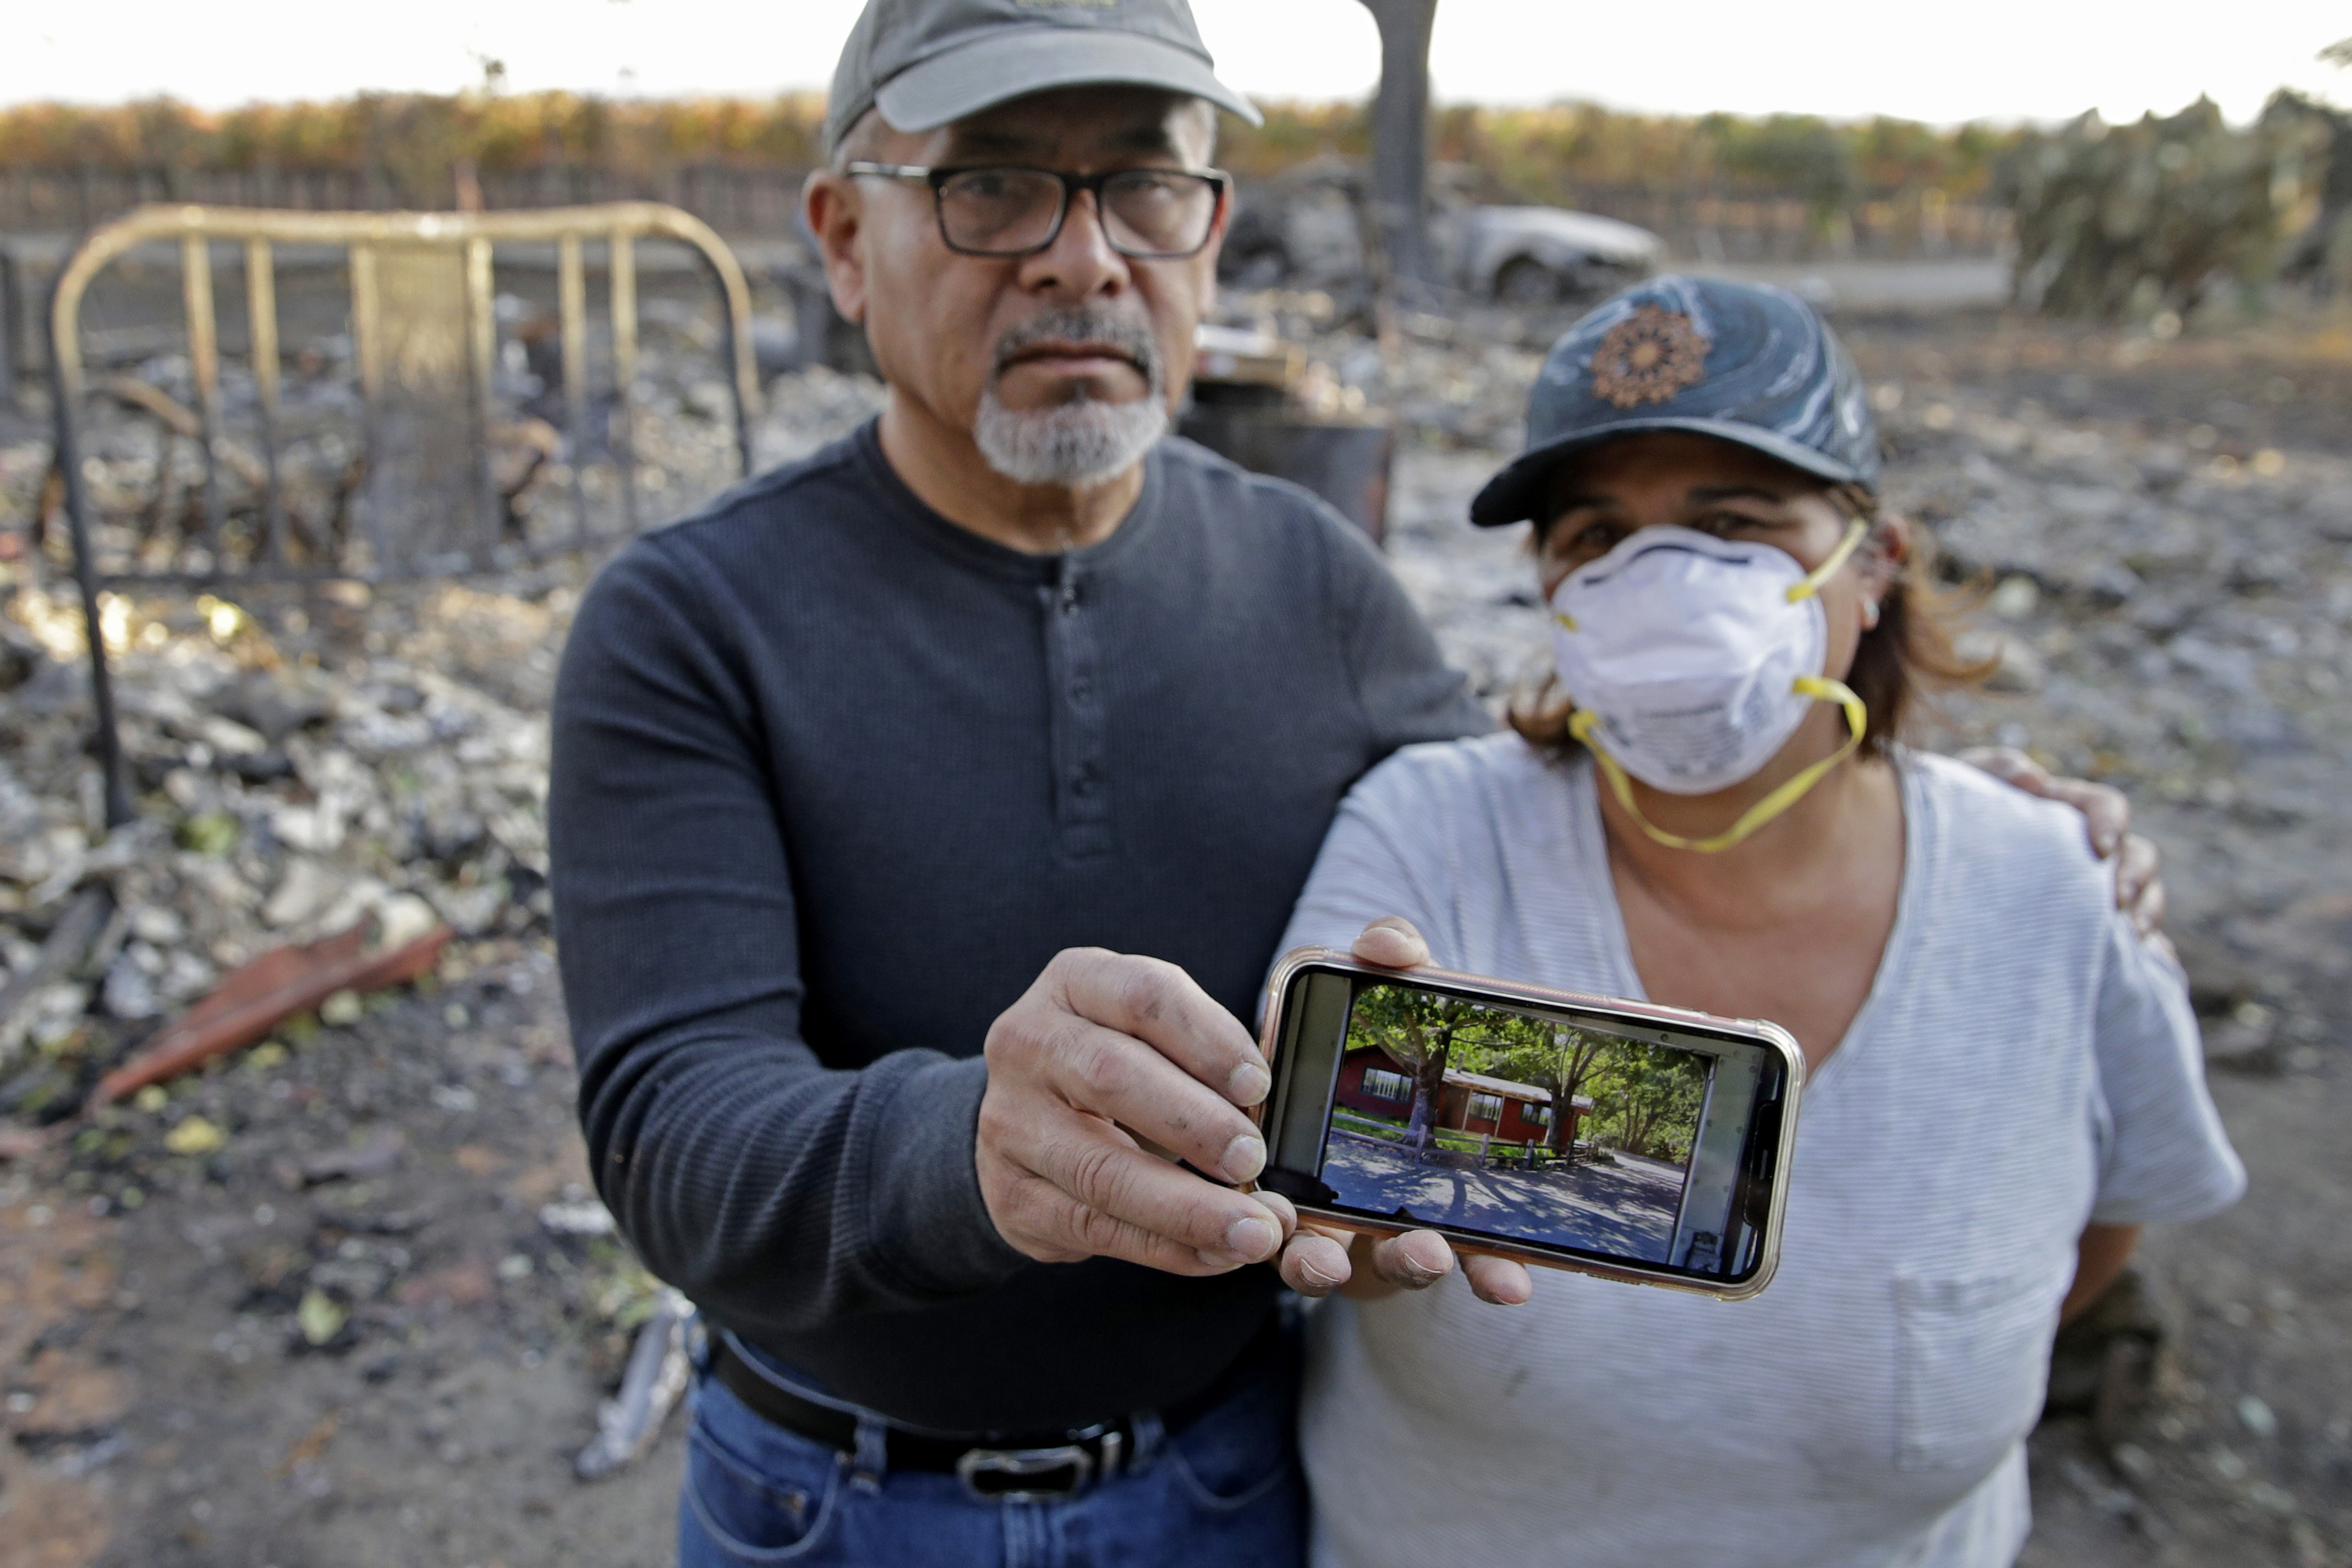 Justo and Bernadette Laos show a photo of the home they rented that was destroyed by wildfire